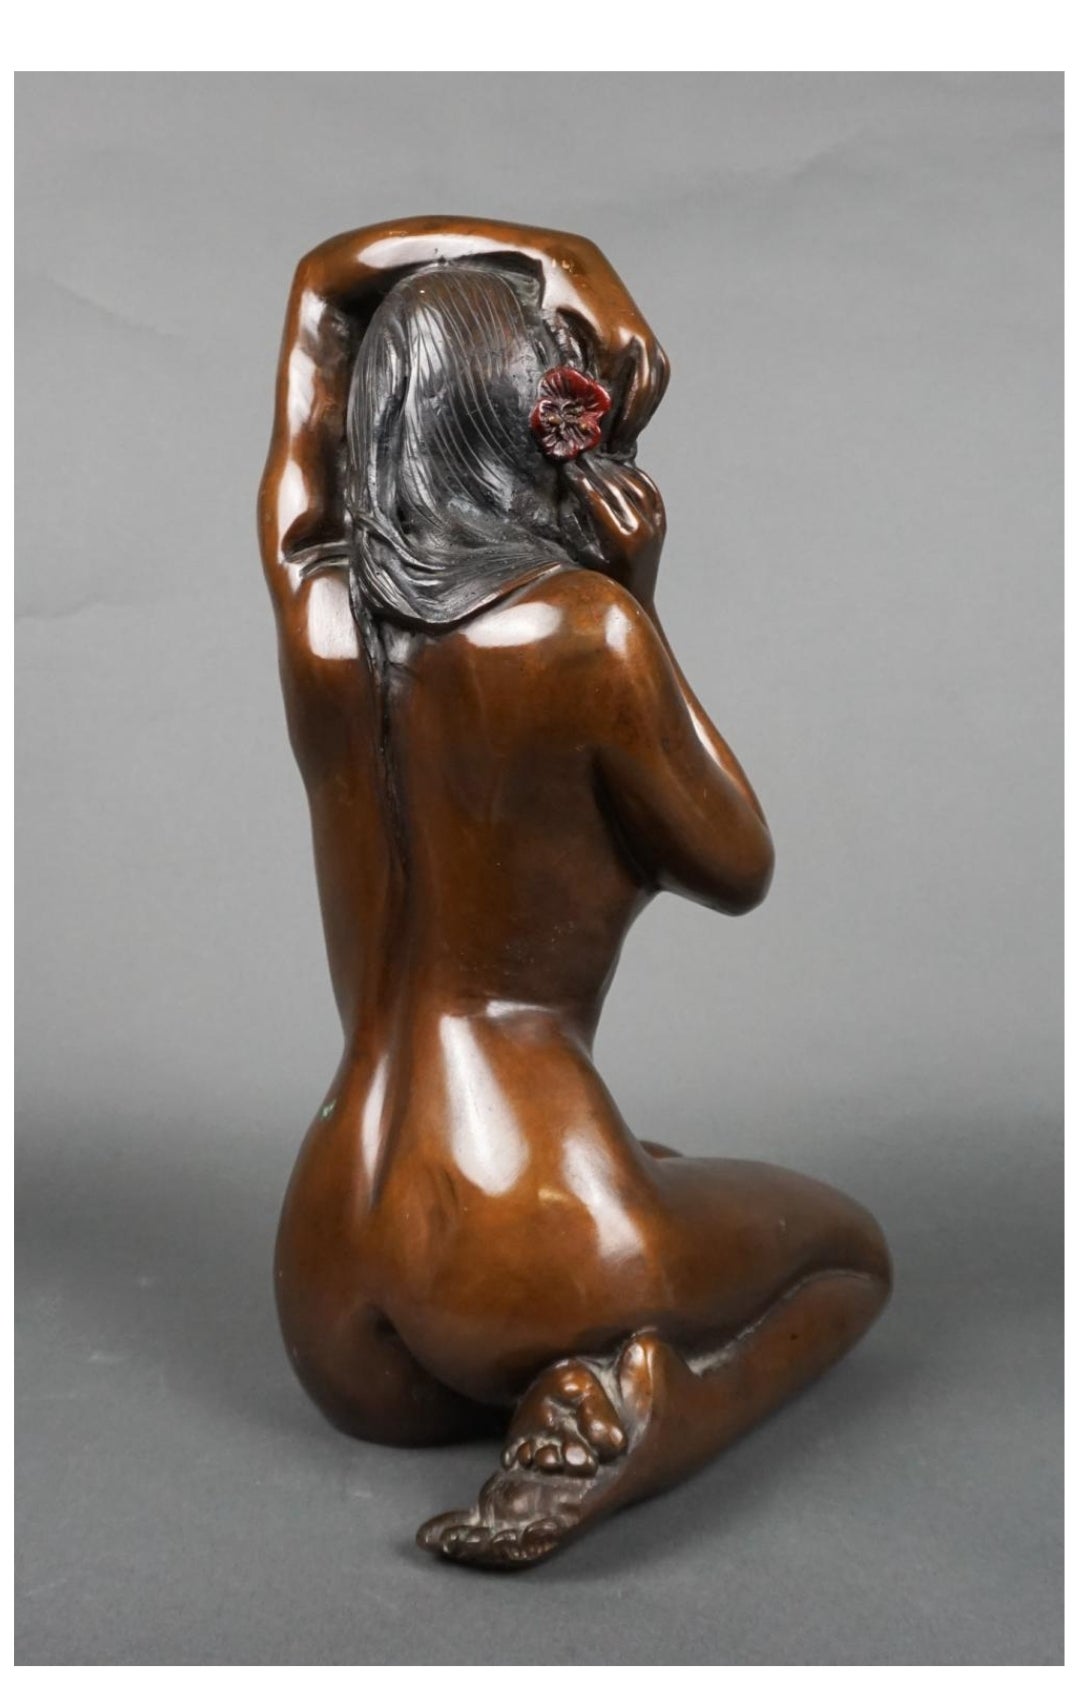  20th Century Large Patinated Metal Sculpture of a Seated Nude Lady signed Roland
Excellent quality.